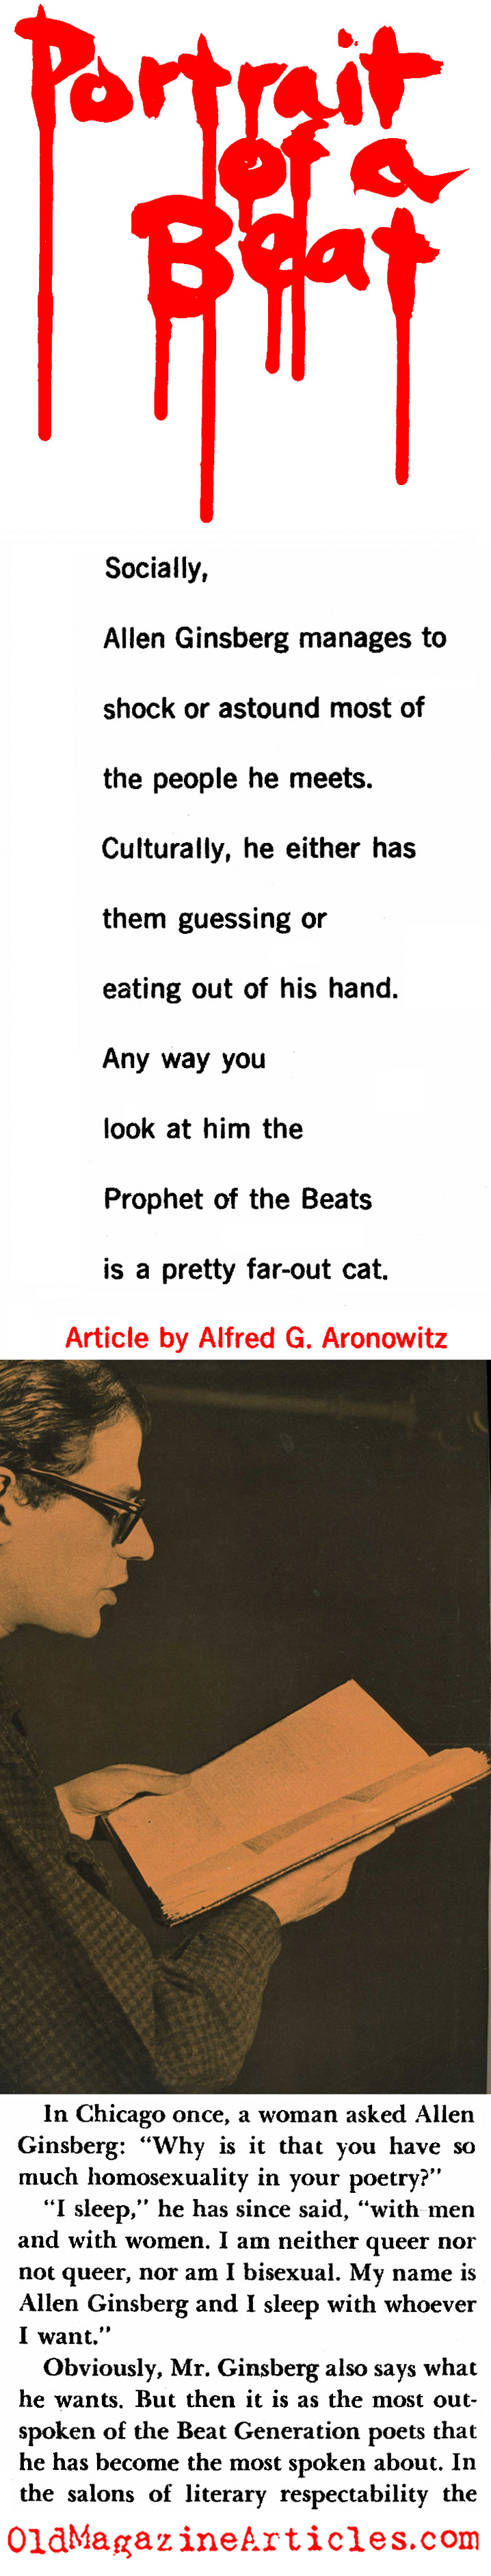 The Prophet of the Beats (Nugget Magazine, 1960)